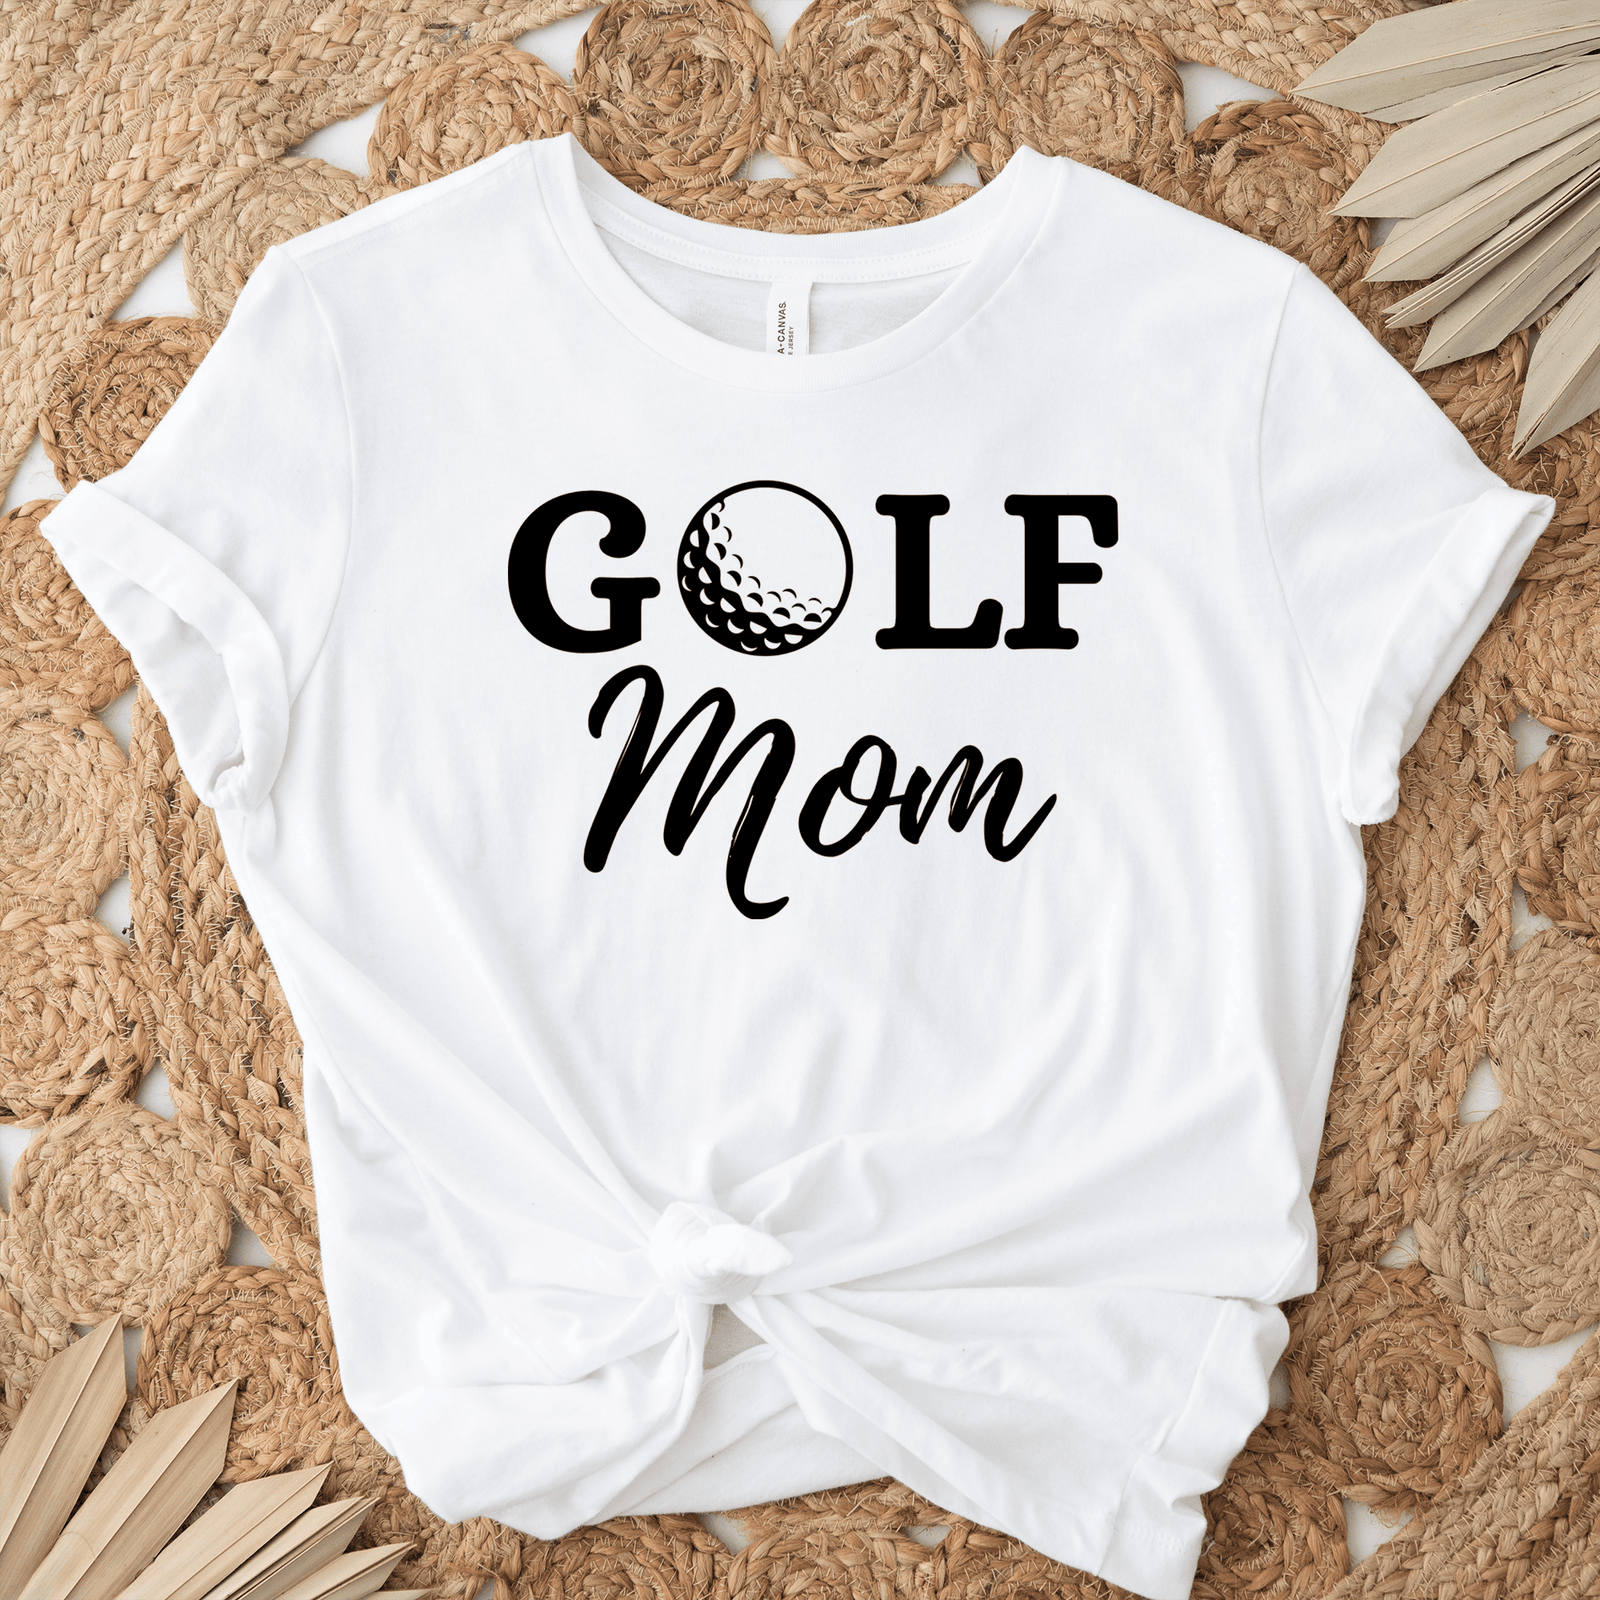 Womens White T Shirt with Best-Golf-Mom design